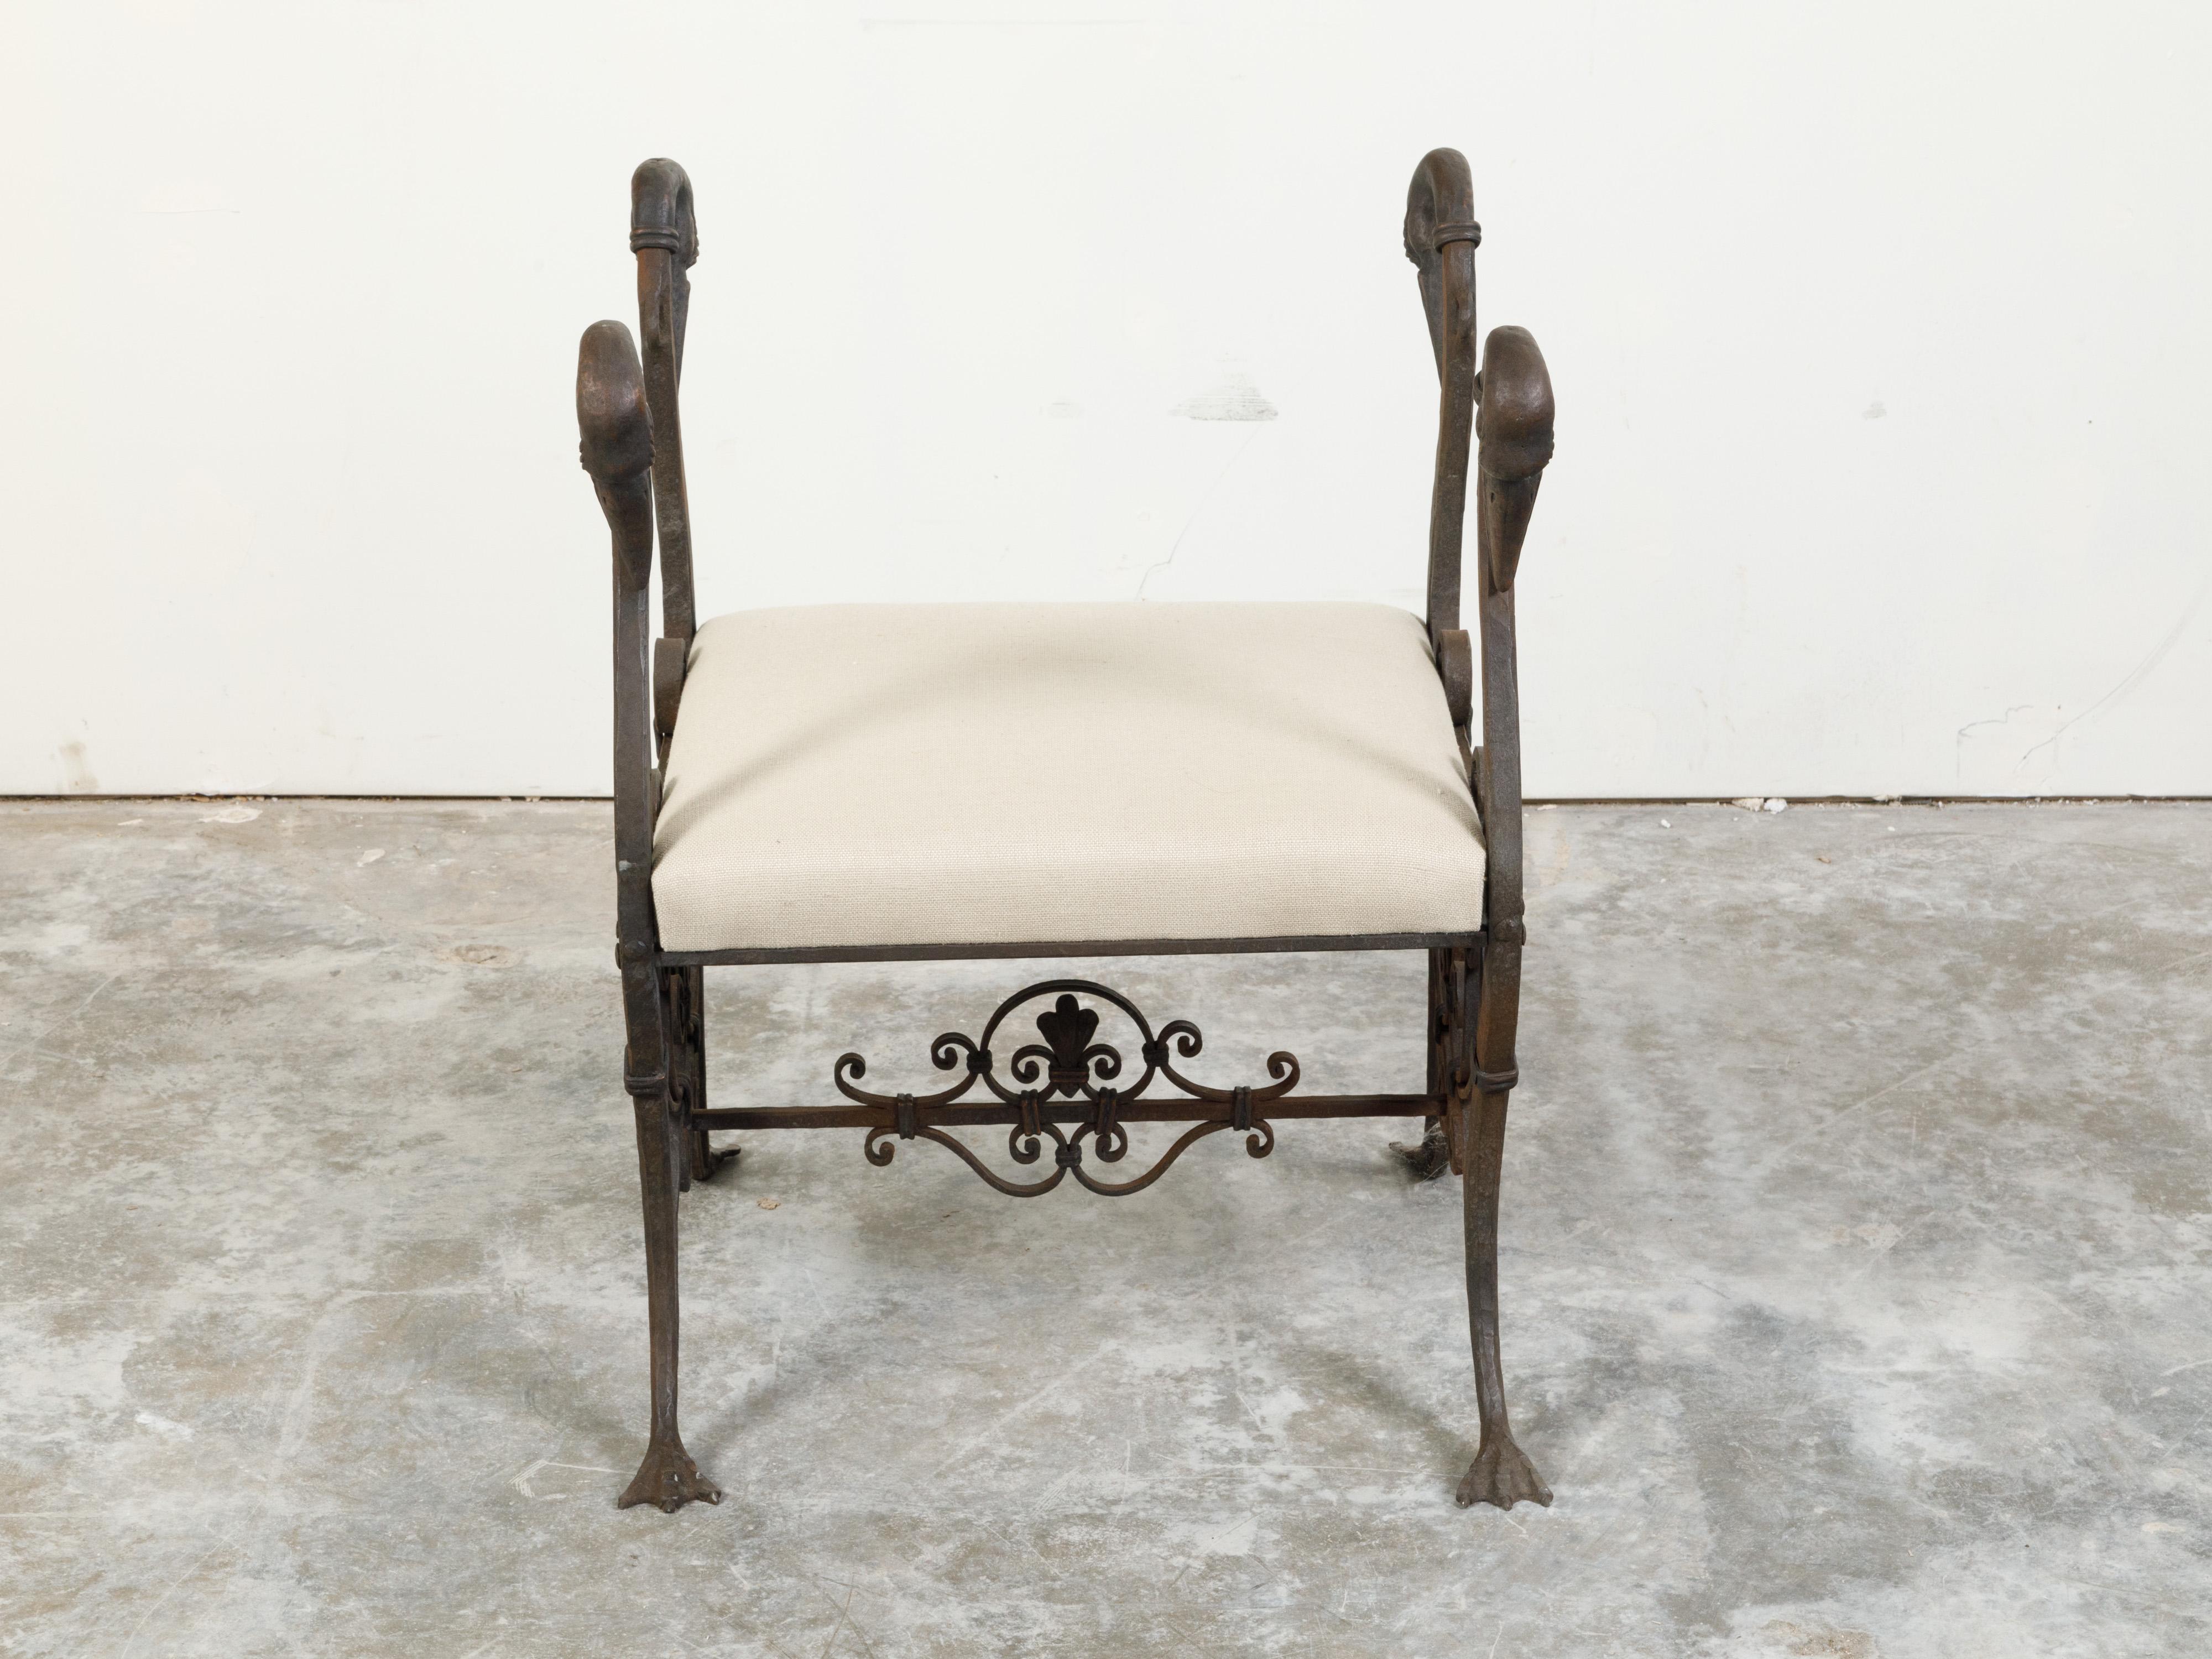 A French Belle Époque iron and bronze stool from the early 20th century, with swan heads, palmed feet and upholstery. Created in France during the Belle Époque era, this iron and bronze stool features a rectangular seat with neutral toned